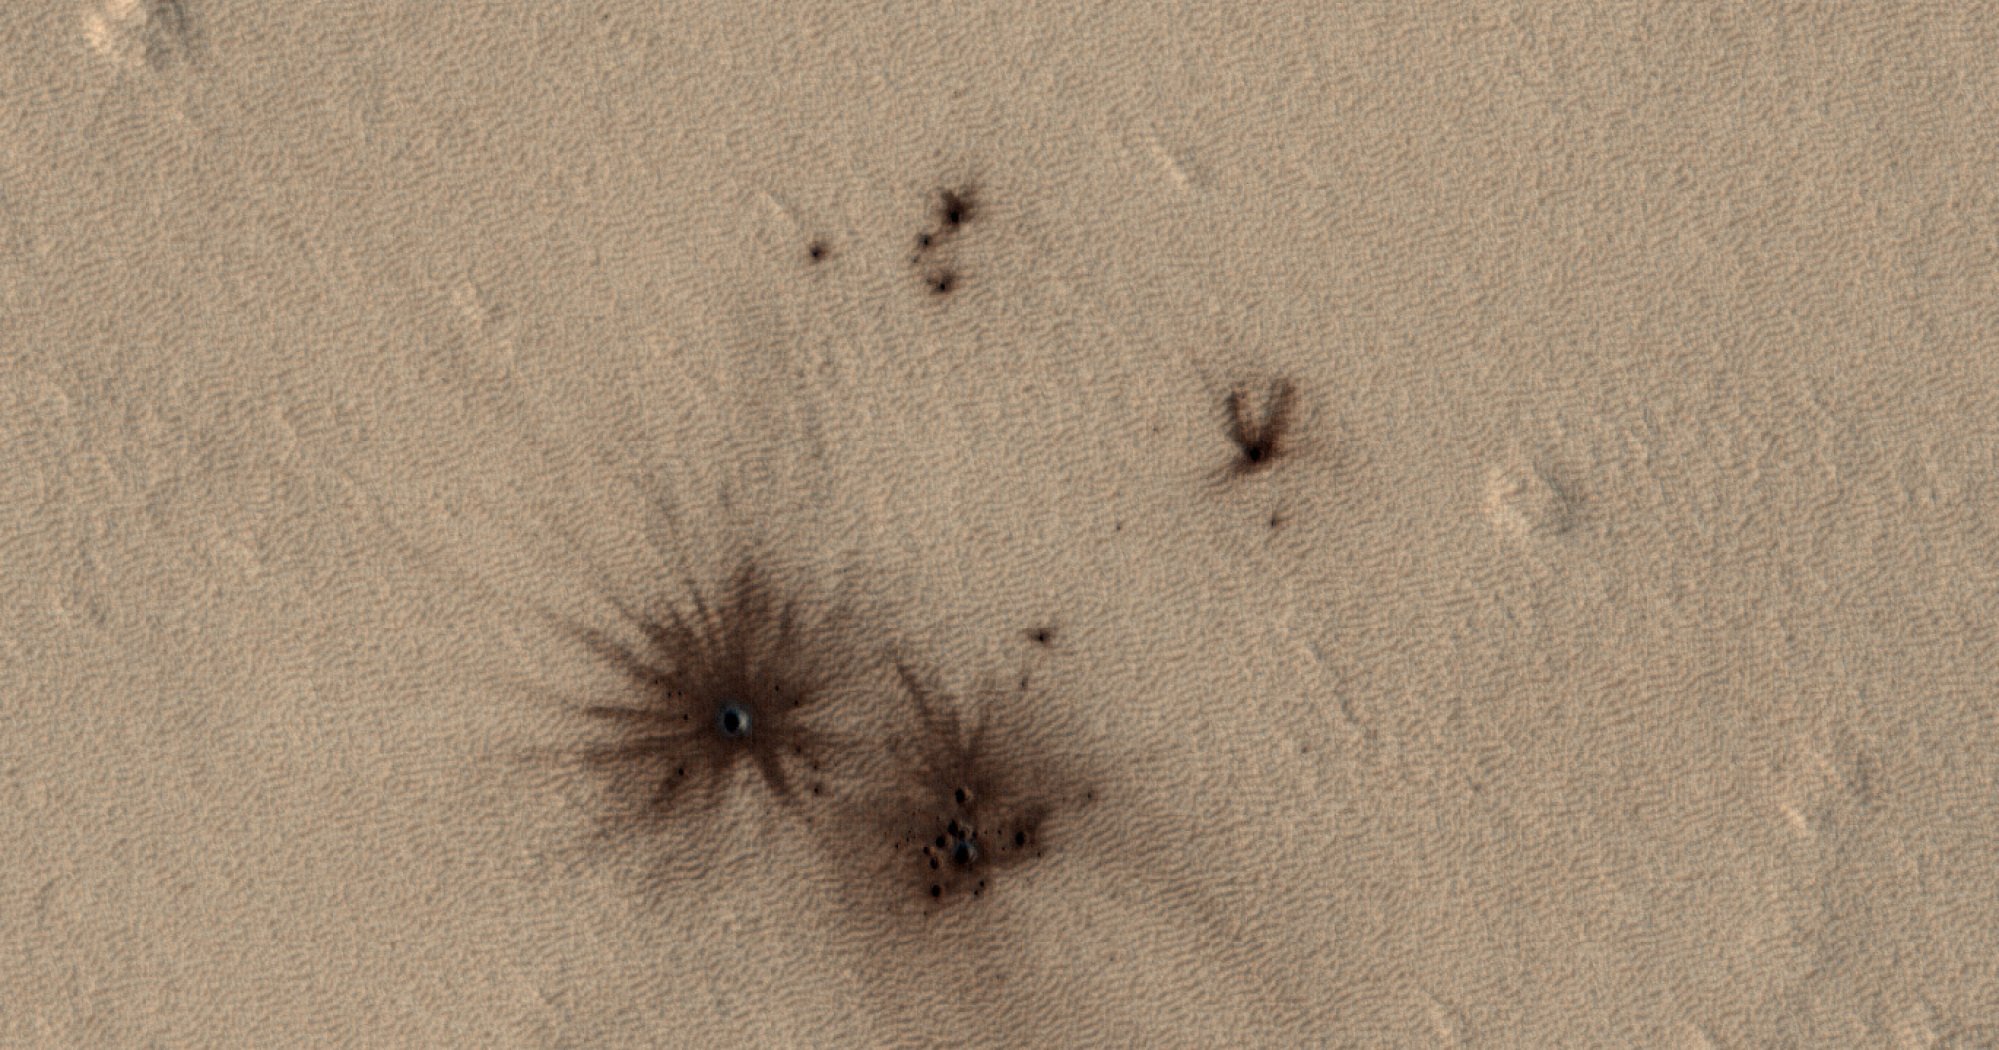 A scattering of impact sites recently captured by NASA's Mars Reconnaissance Orbiter.